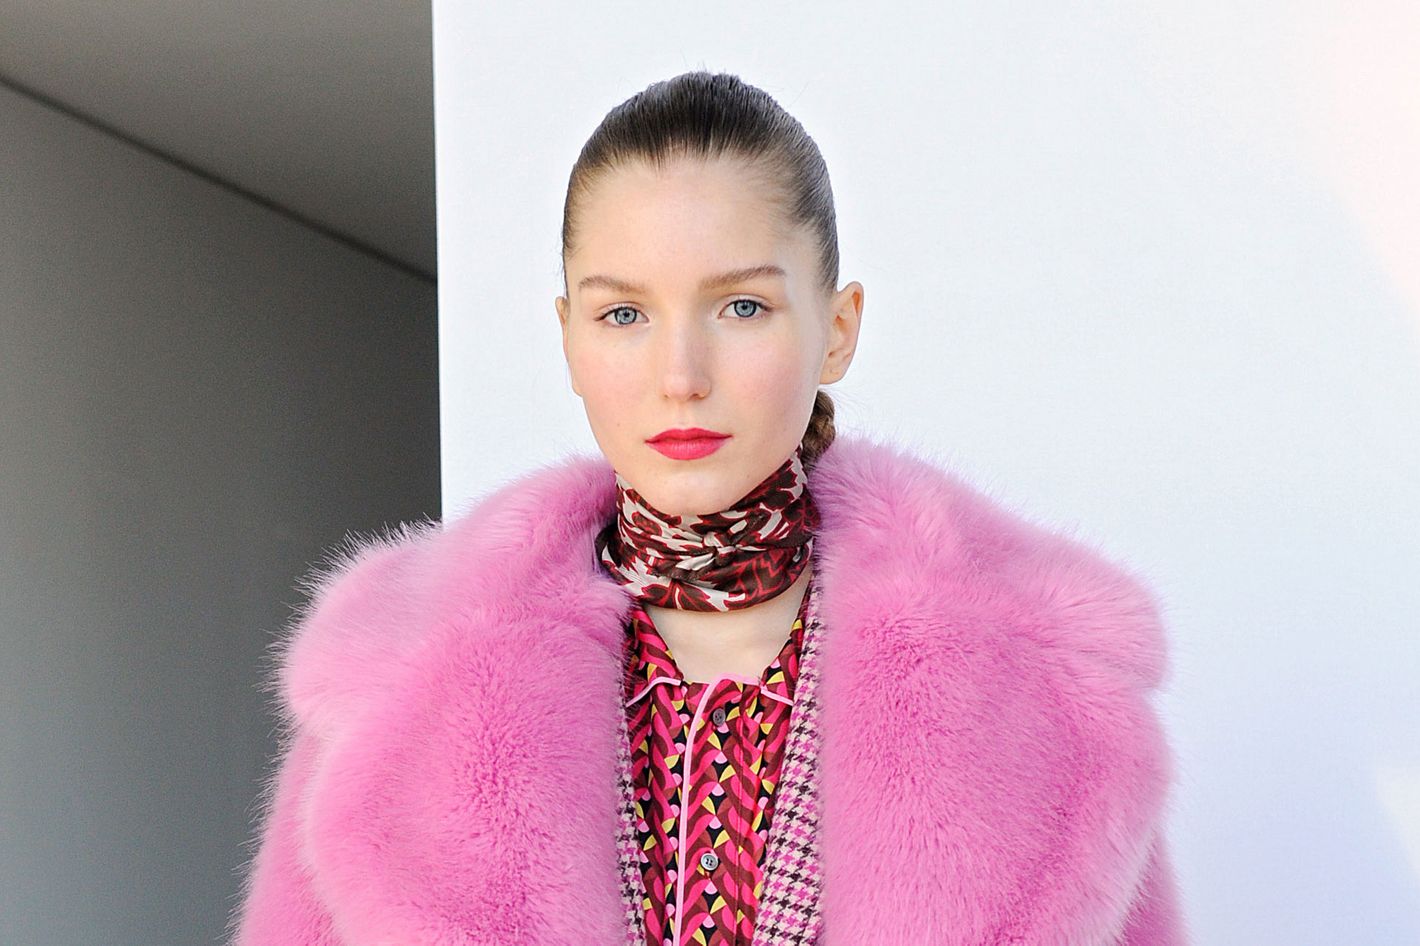 J.Crew Really Hit the Jackpot With This Pink Faux-Fur Jacket